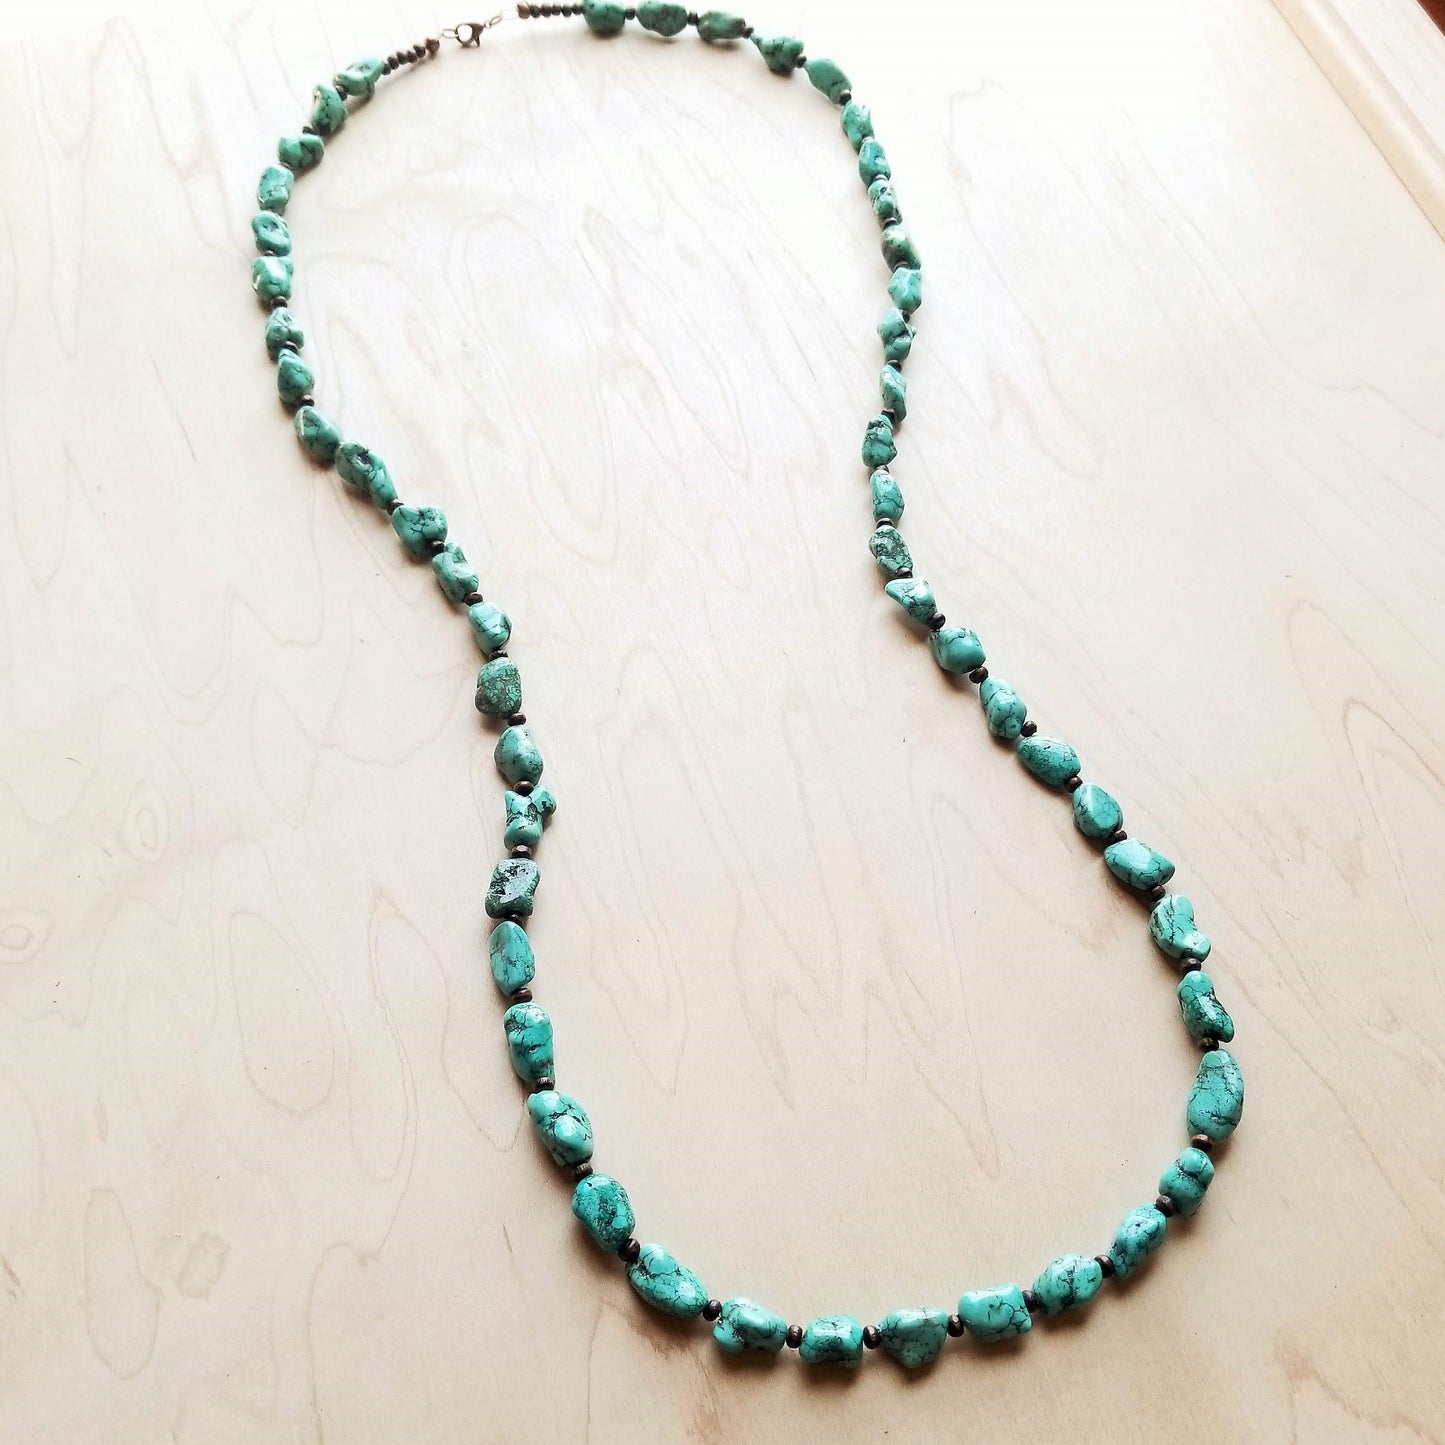 A long turquoise necklace with wooden beads from The Jewelry Junkie.